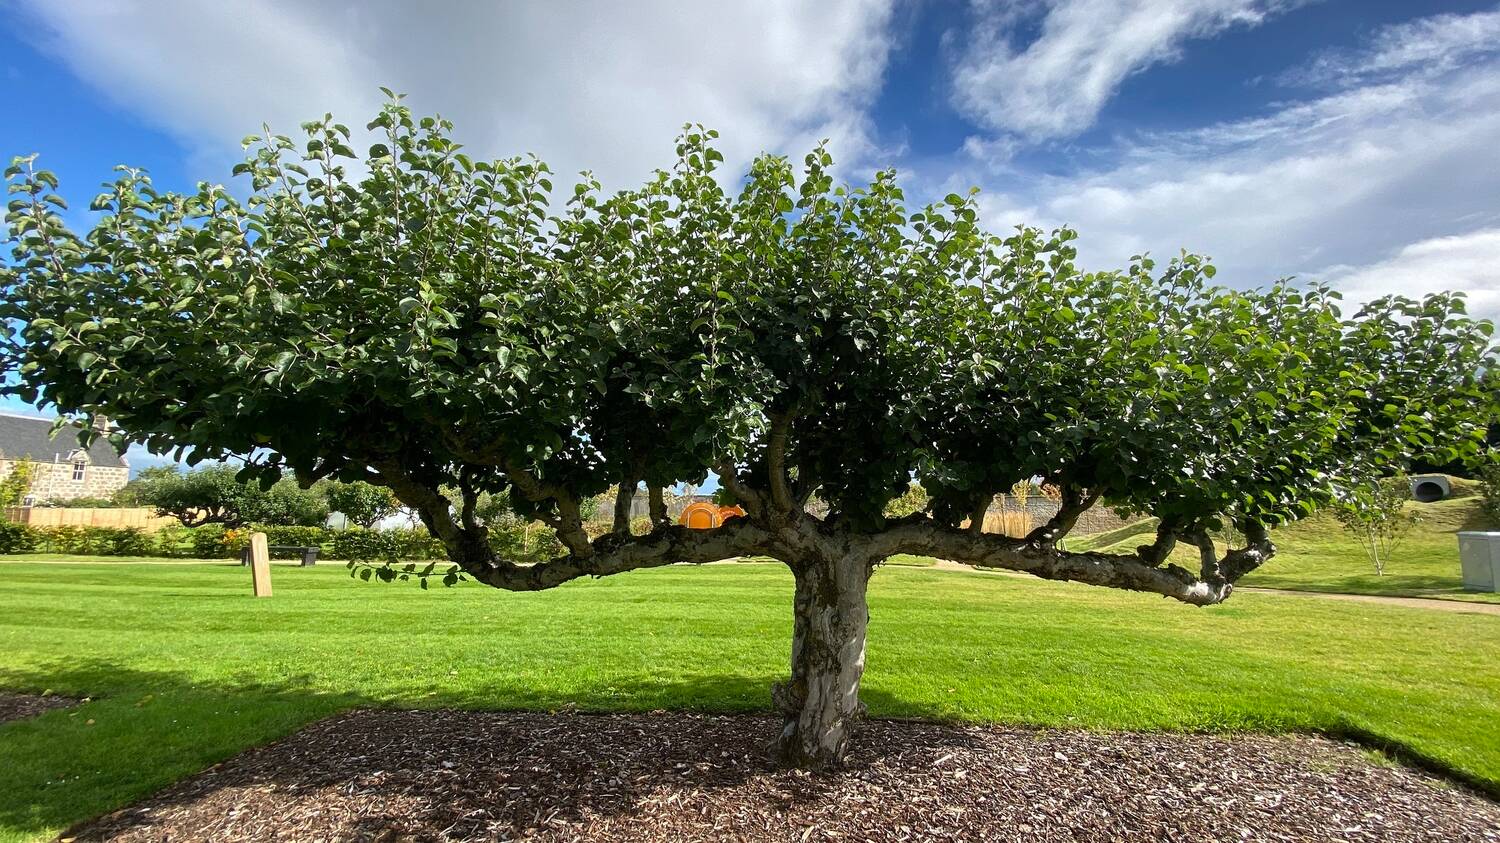 A single apple tree stands in a woodchip plot, in the middle of a neat lawn. It has very wide horizontal branches, with smaller ones almost standing vertically towards the sky. It is covered in green leaves.